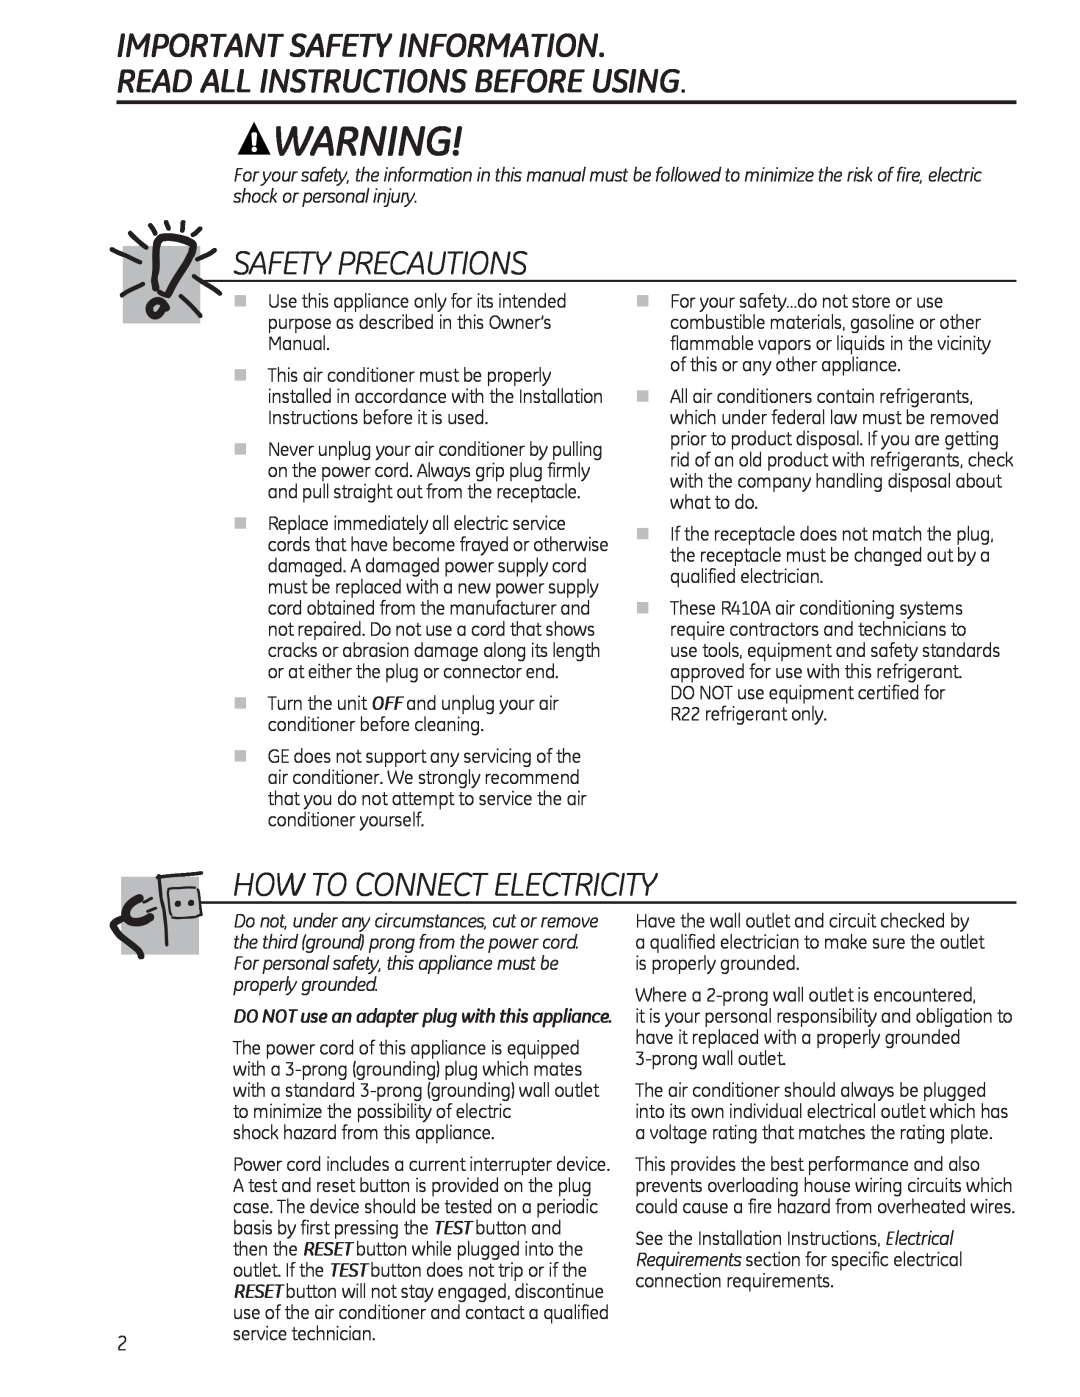 GE AEL05 Important Safety Information, Read All Instructions Before Using, Safety Precautions, How To Connect Electricity 